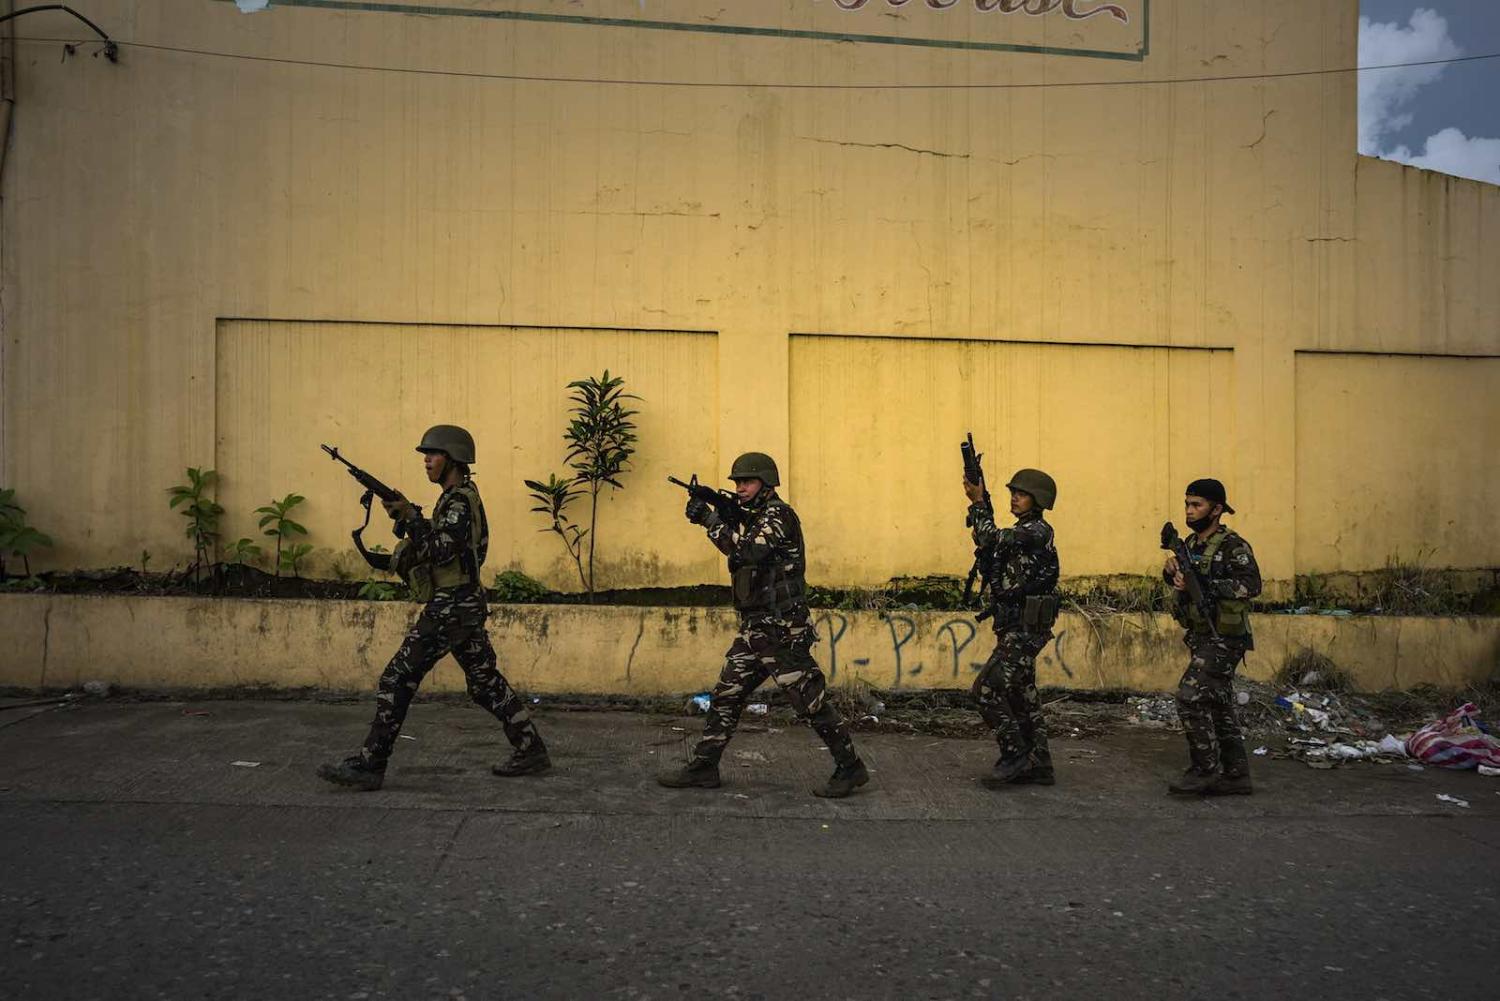 Philippine soldiers in Marawi city, 25 May 2017, two days after martial law was declared across Mindanao region. (Photo: Jes Aznar/Getty Images)